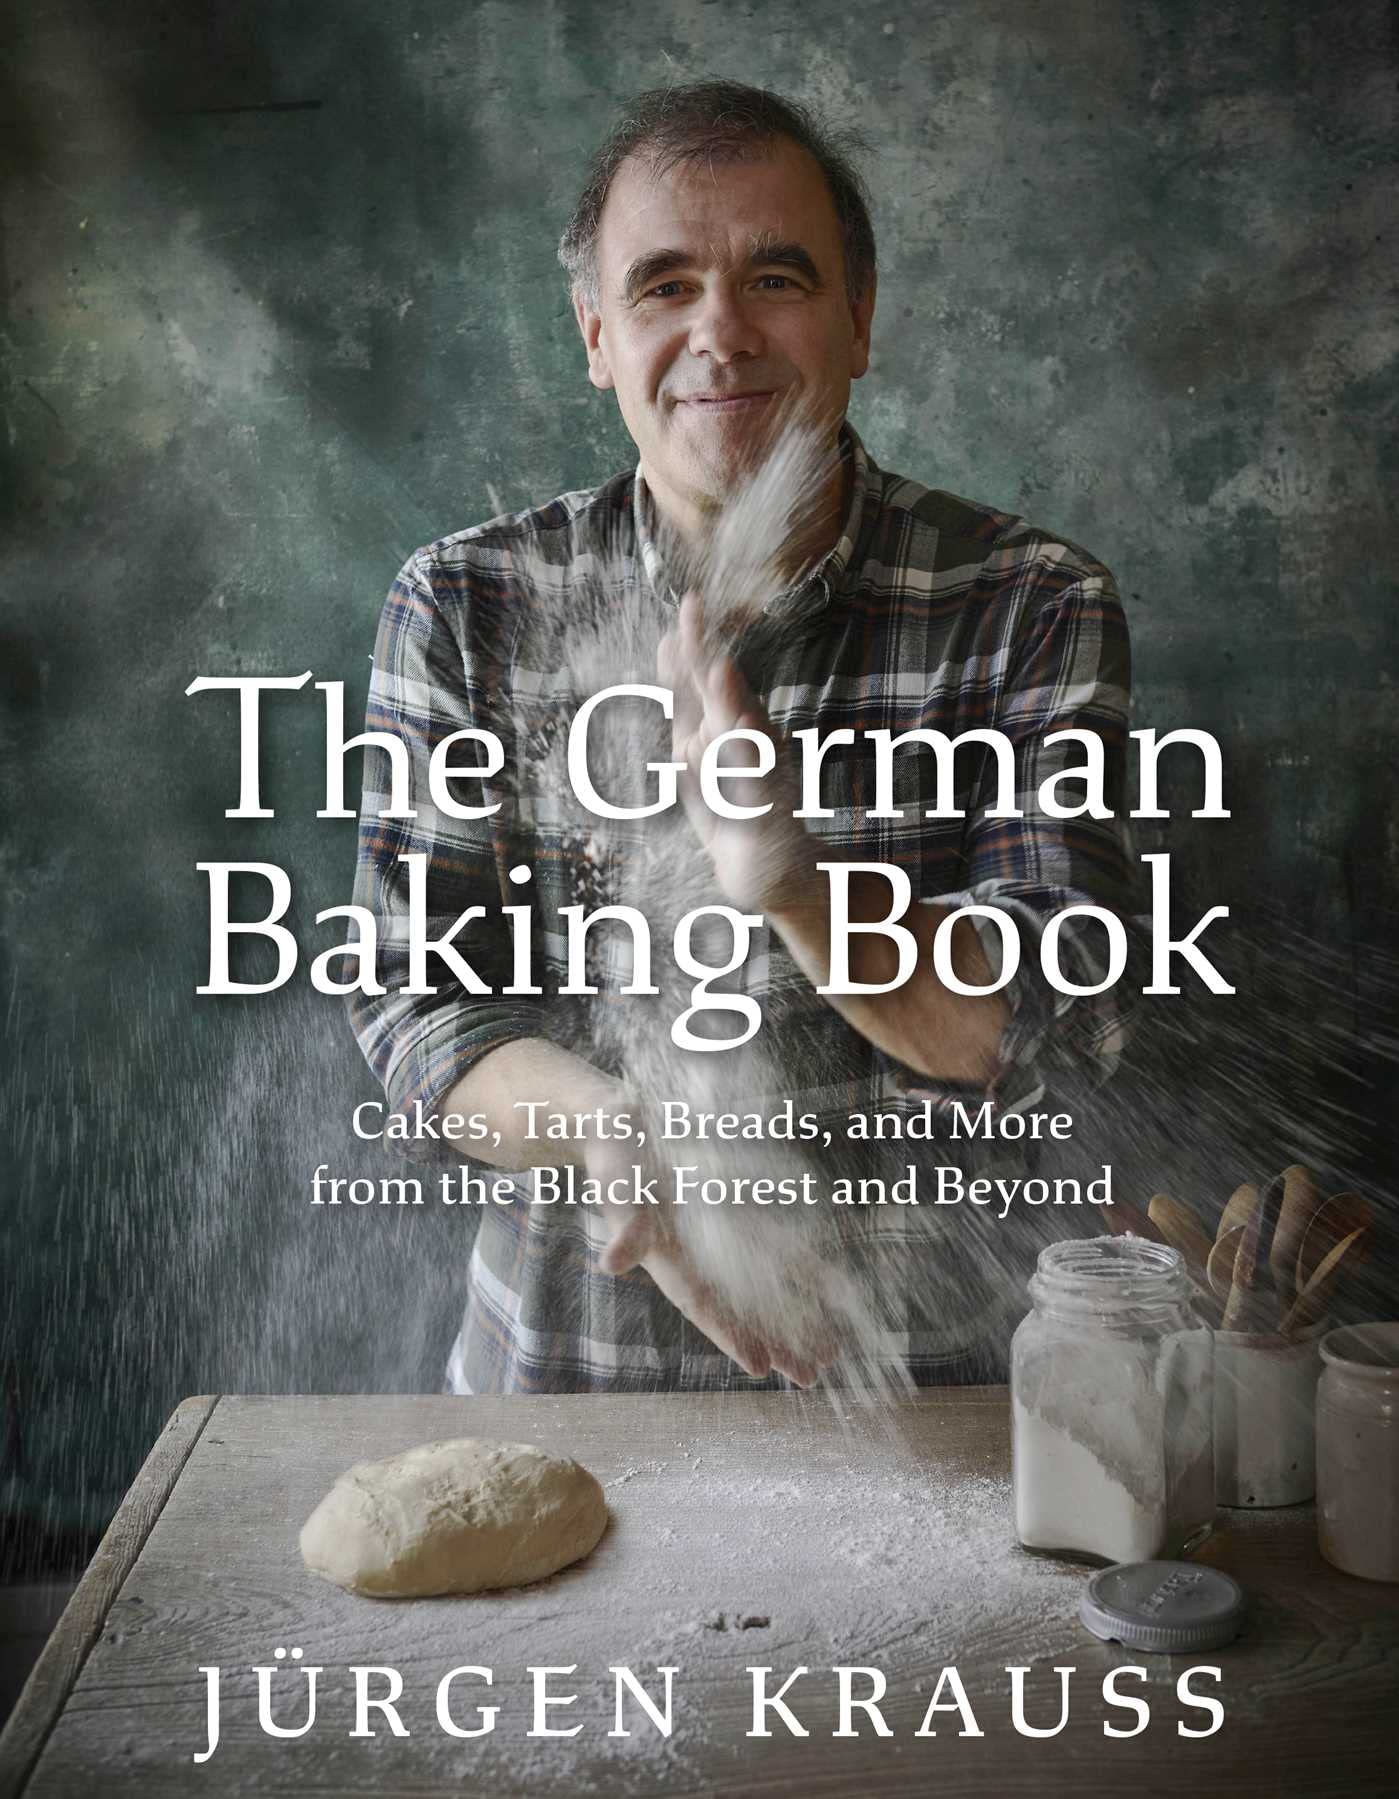 The German Baking Book: Cakes, Tarts, Breads, and More from the Black Forest and Beyond (Jurgen Krauss)